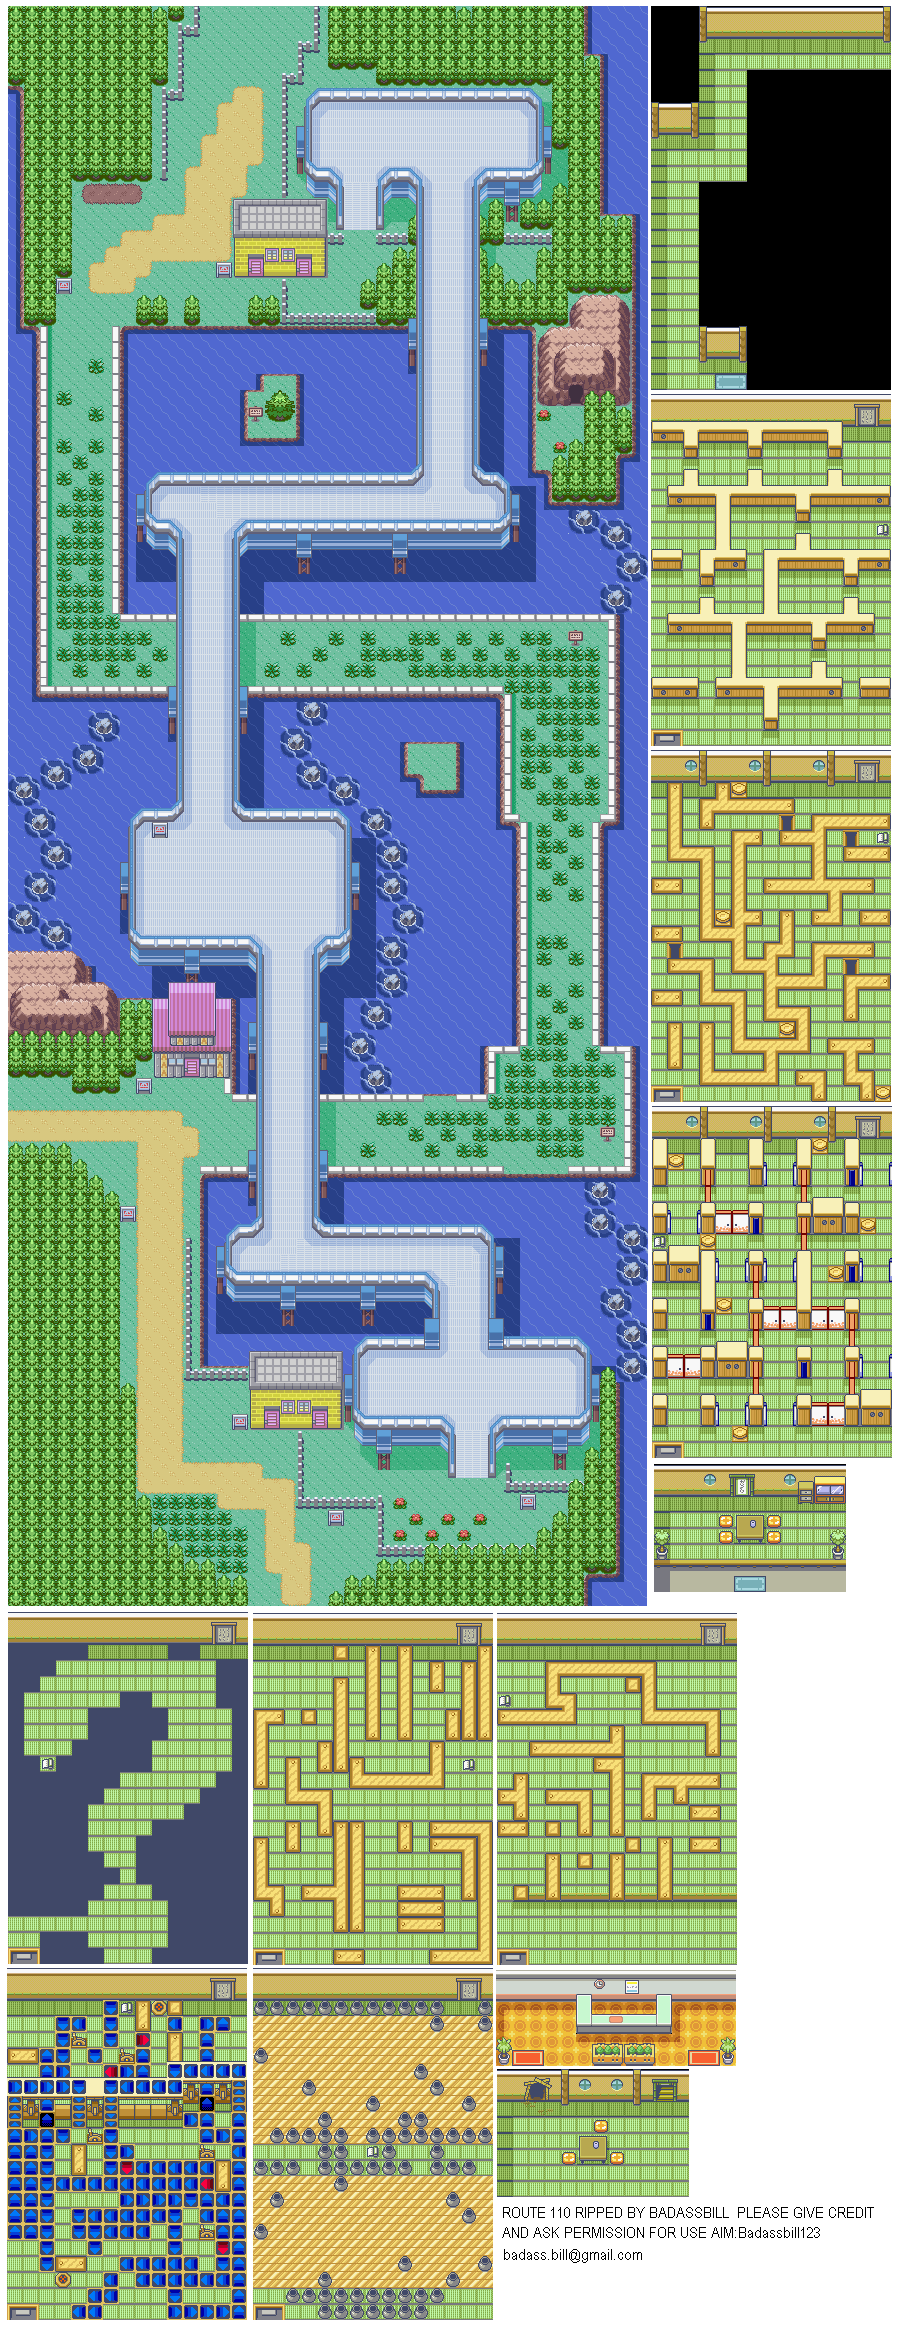 Route 110